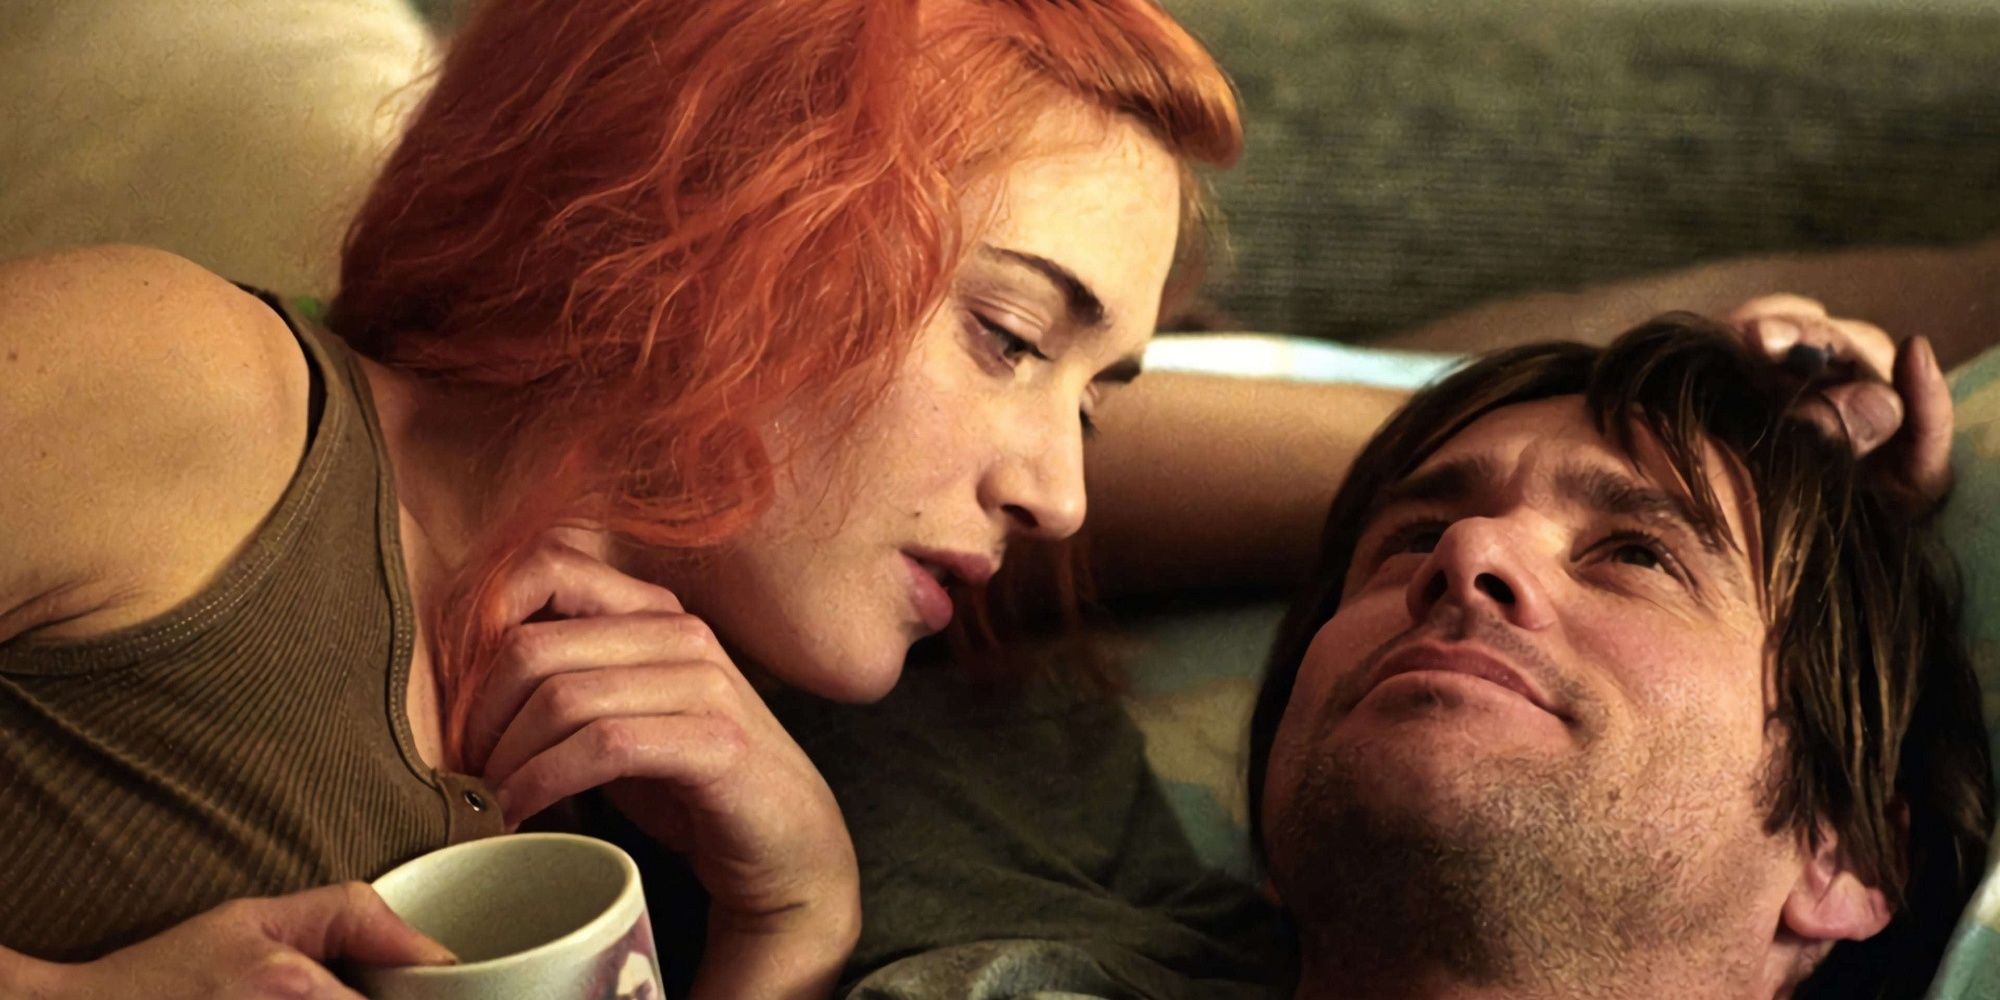 Kate Winslet and Jim Carrey laying with each other drinking coffee.